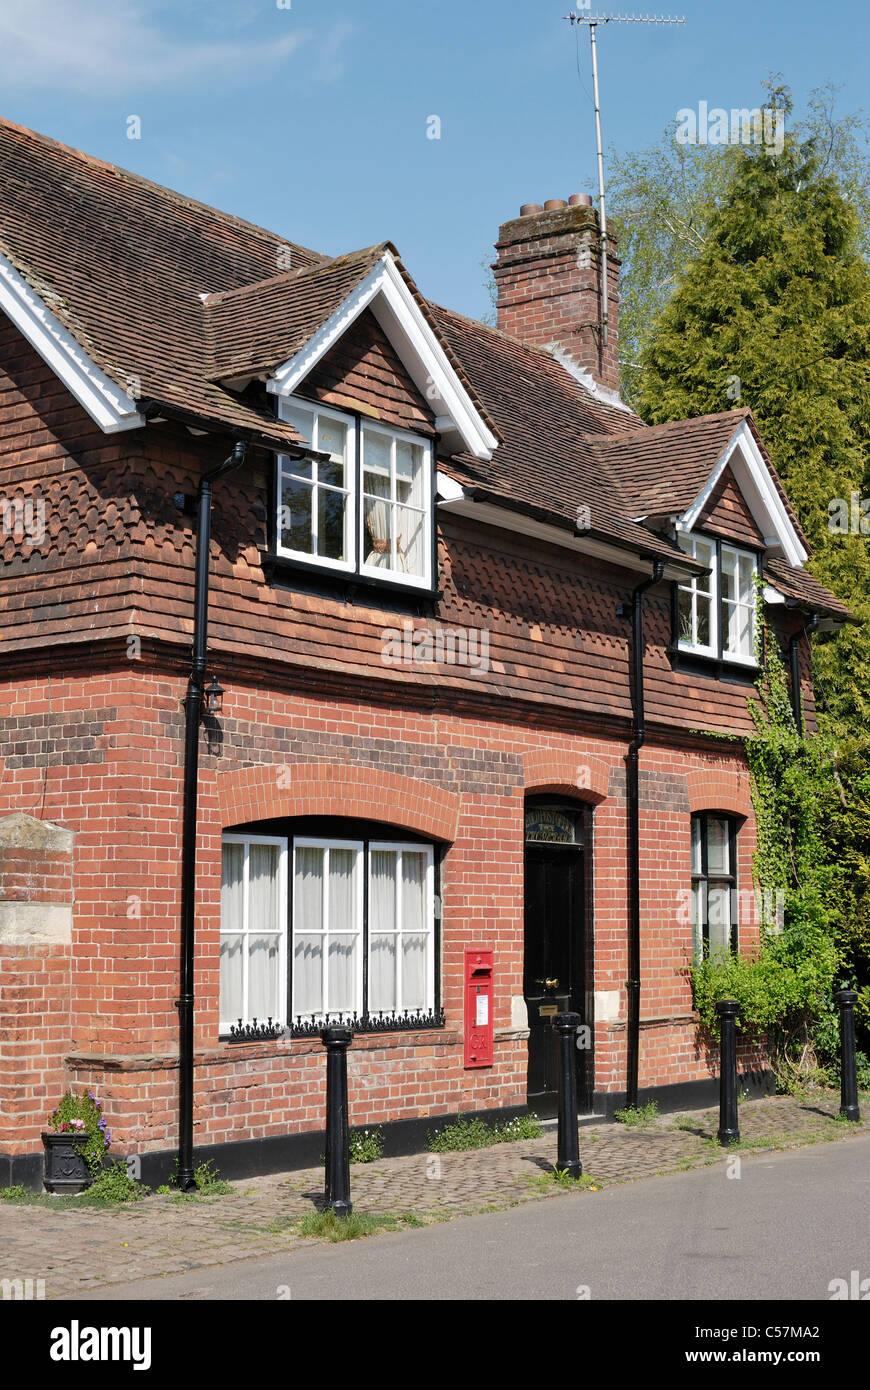 The Post Office in the village of Shoreham, Kent, England. Brick and tile building Stock Photo